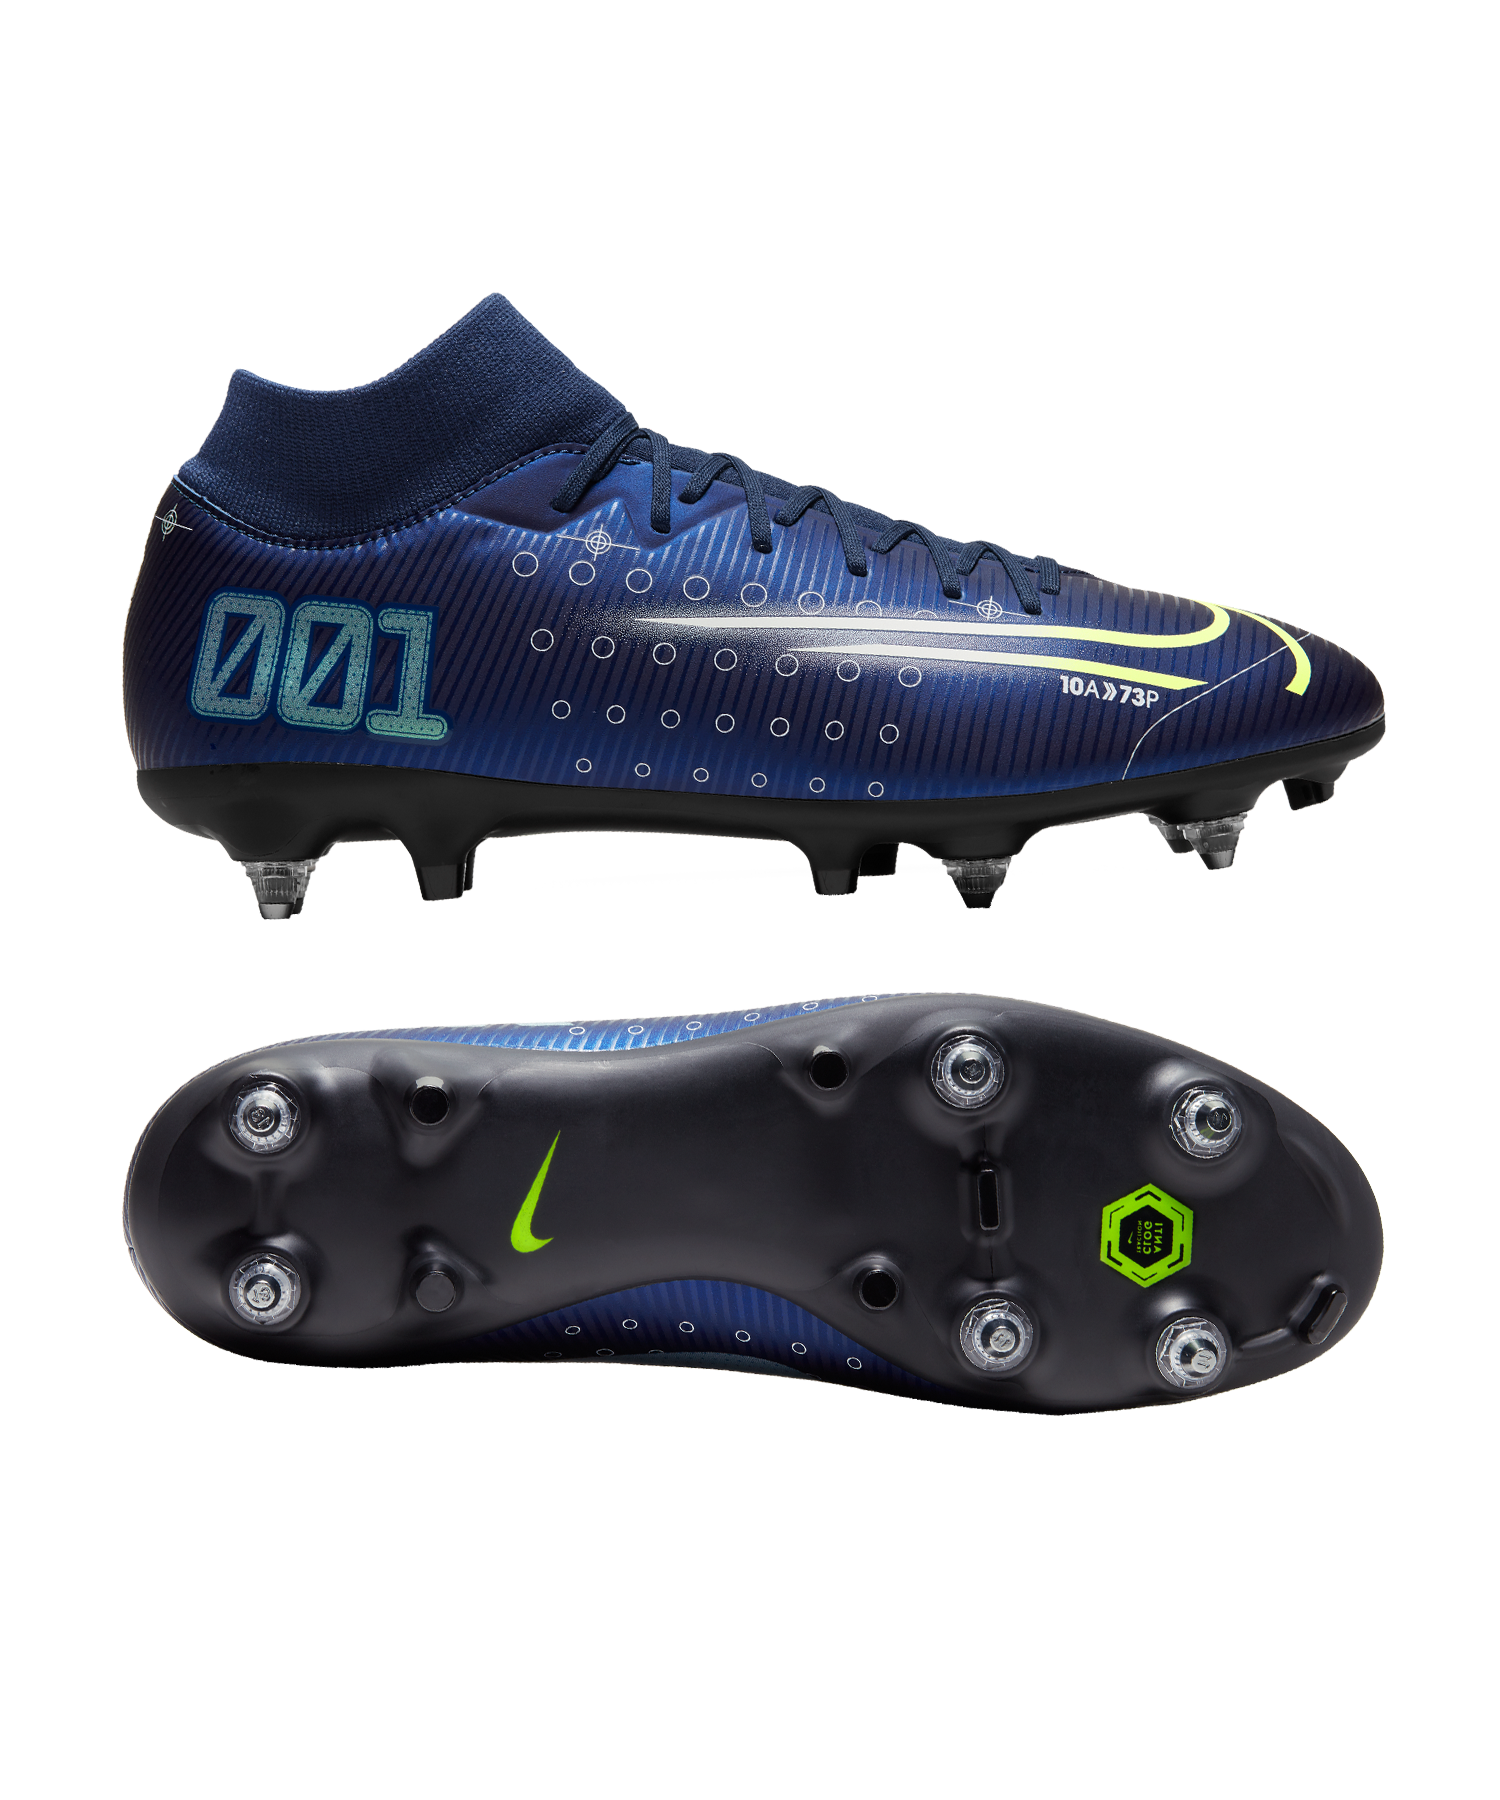 Mercurial Dream Speed Profile Soccer Cleats 101